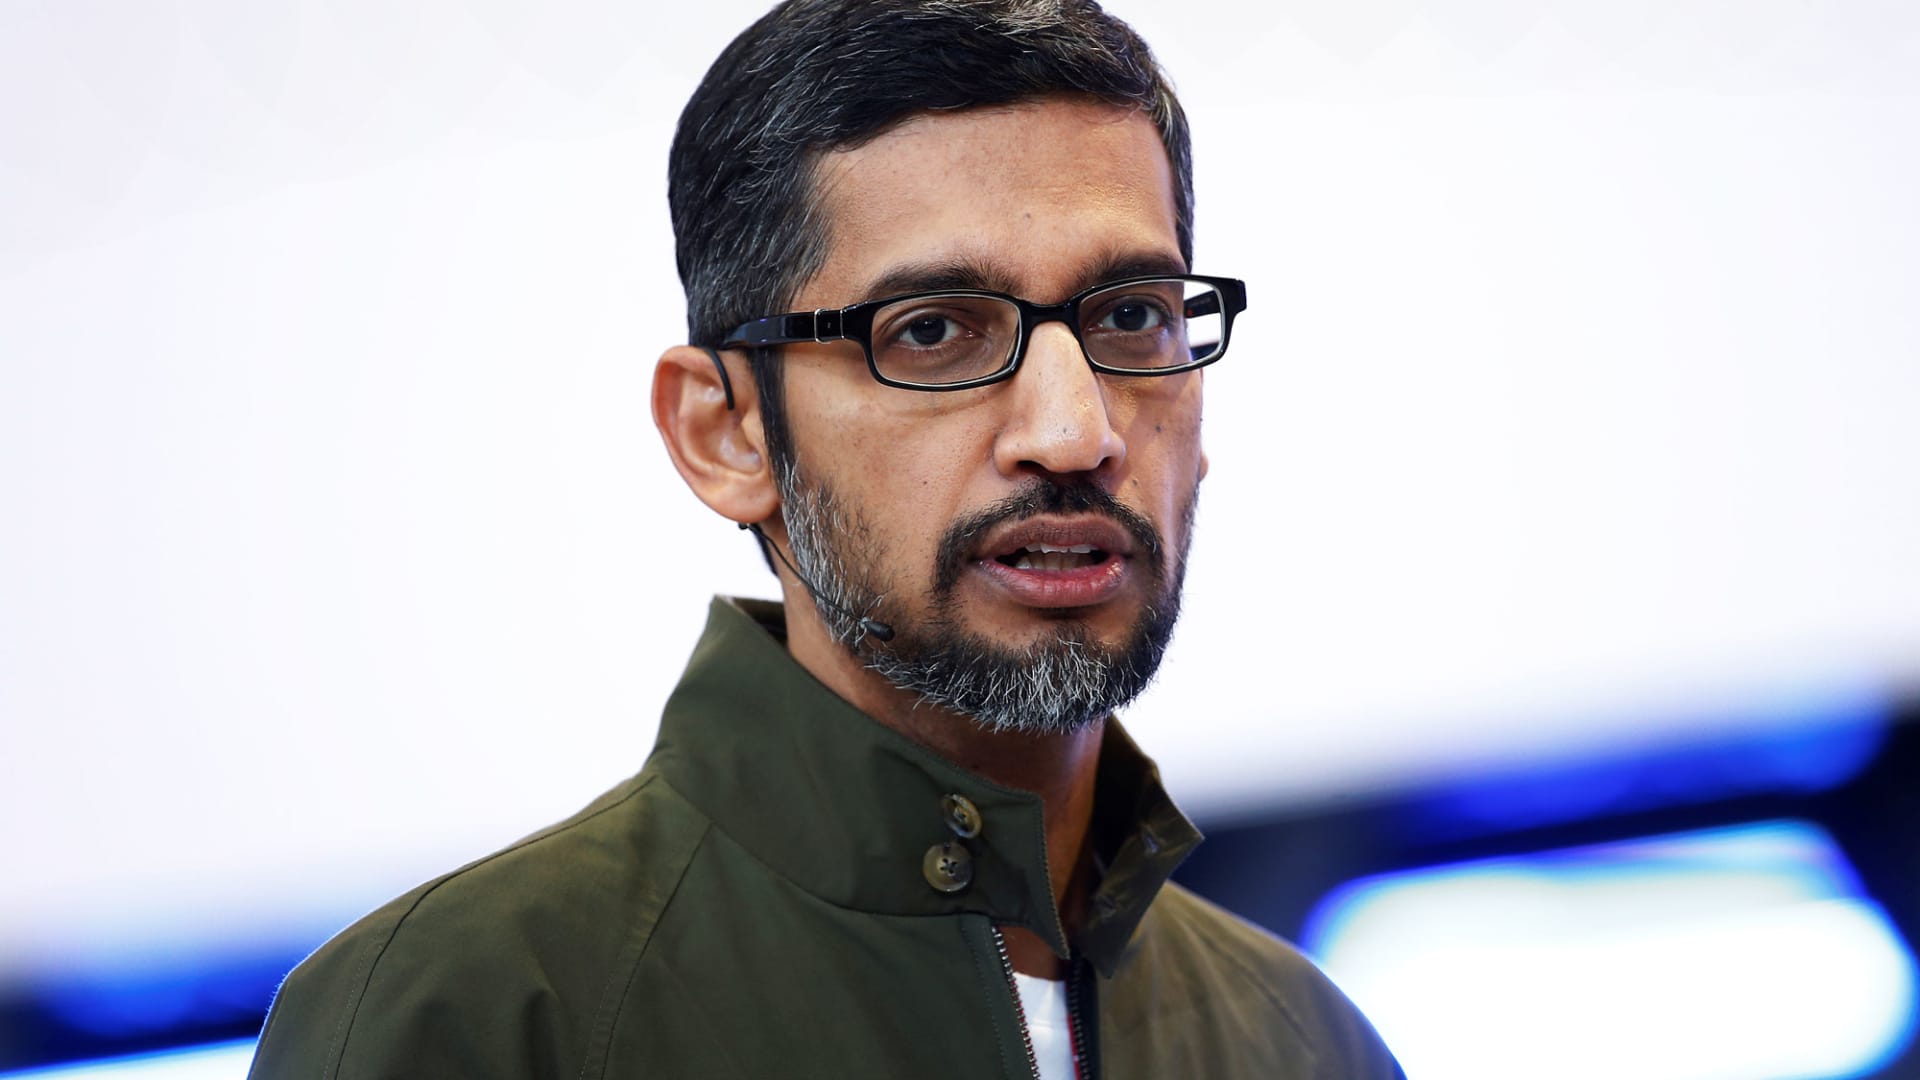 Google CEO tells employees productivity and focus must improve, launches 'Simplicity Sprint' to gather employee feedback on efficiency